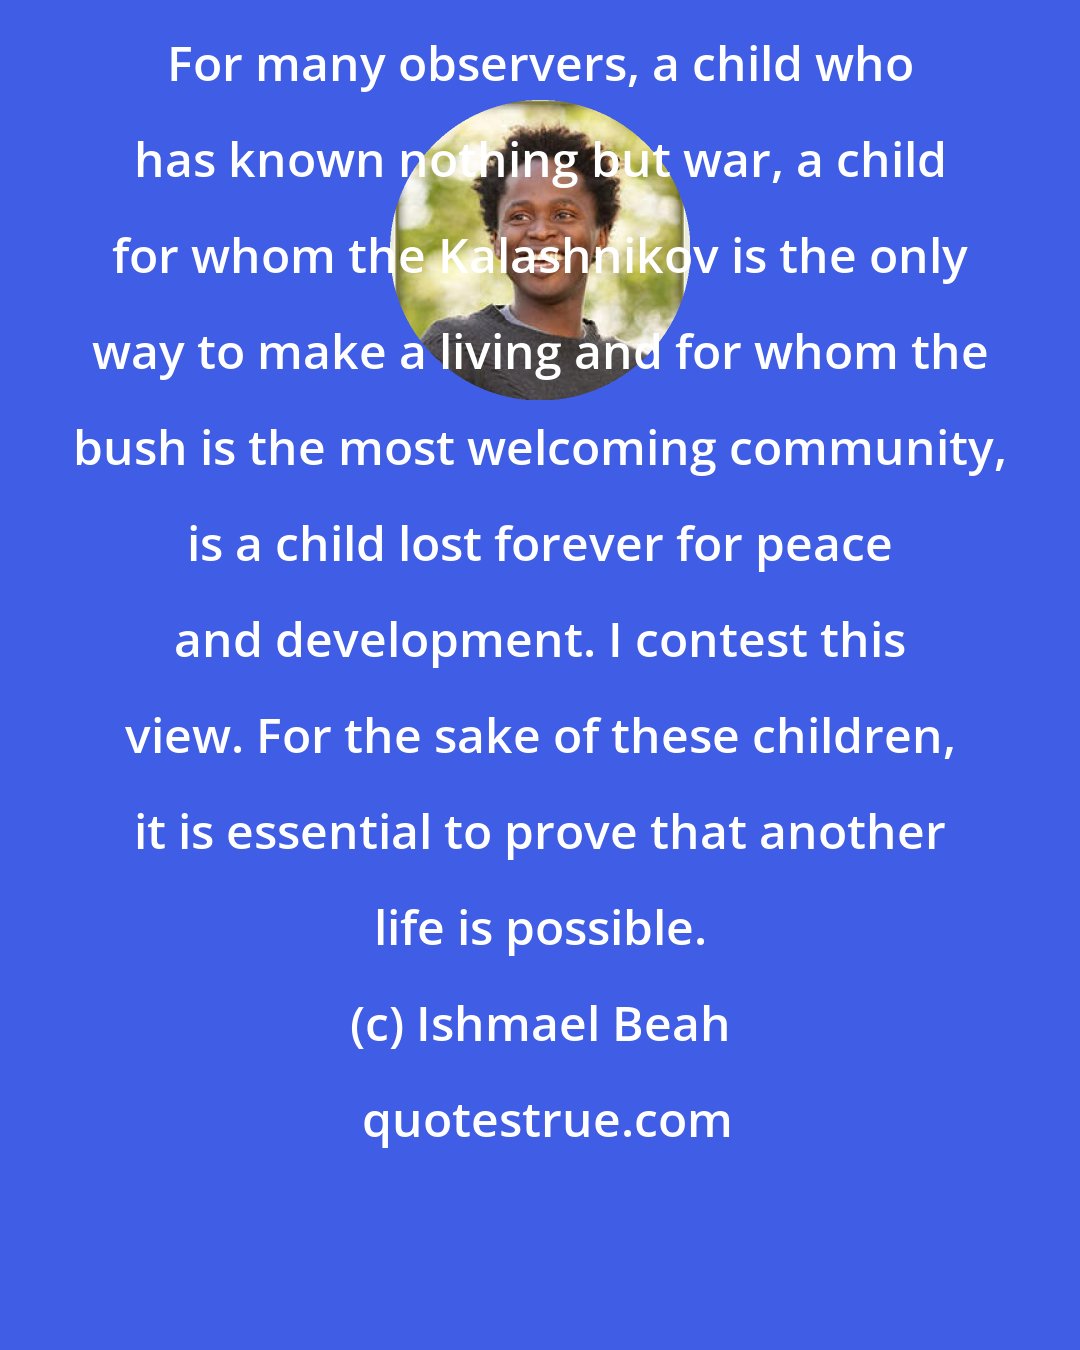 Ishmael Beah: For many observers, a child who has known nothing but war, a child for whom the Kalashnikov is the only way to make a living and for whom the bush is the most welcoming community, is a child lost forever for peace and development. I contest this view. For the sake of these children, it is essential to prove that another life is possible.